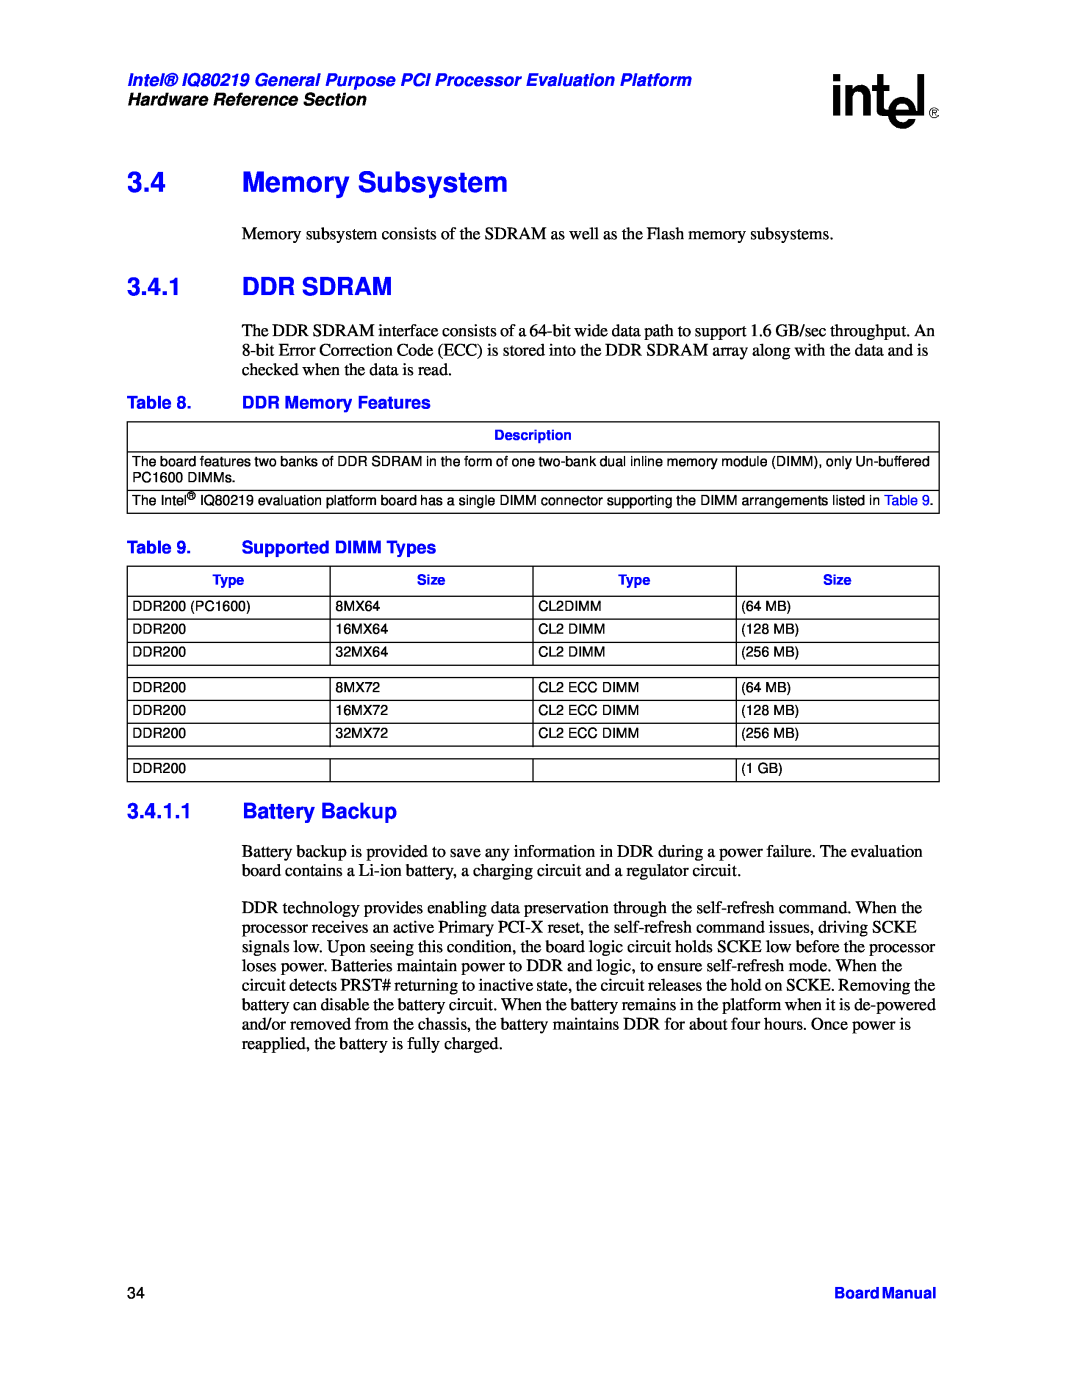 Intel IQ80219 manual Memory Subsystem, Ddr Sdram, Battery Backup, DDR Memory Features, Supported DIMM Types 